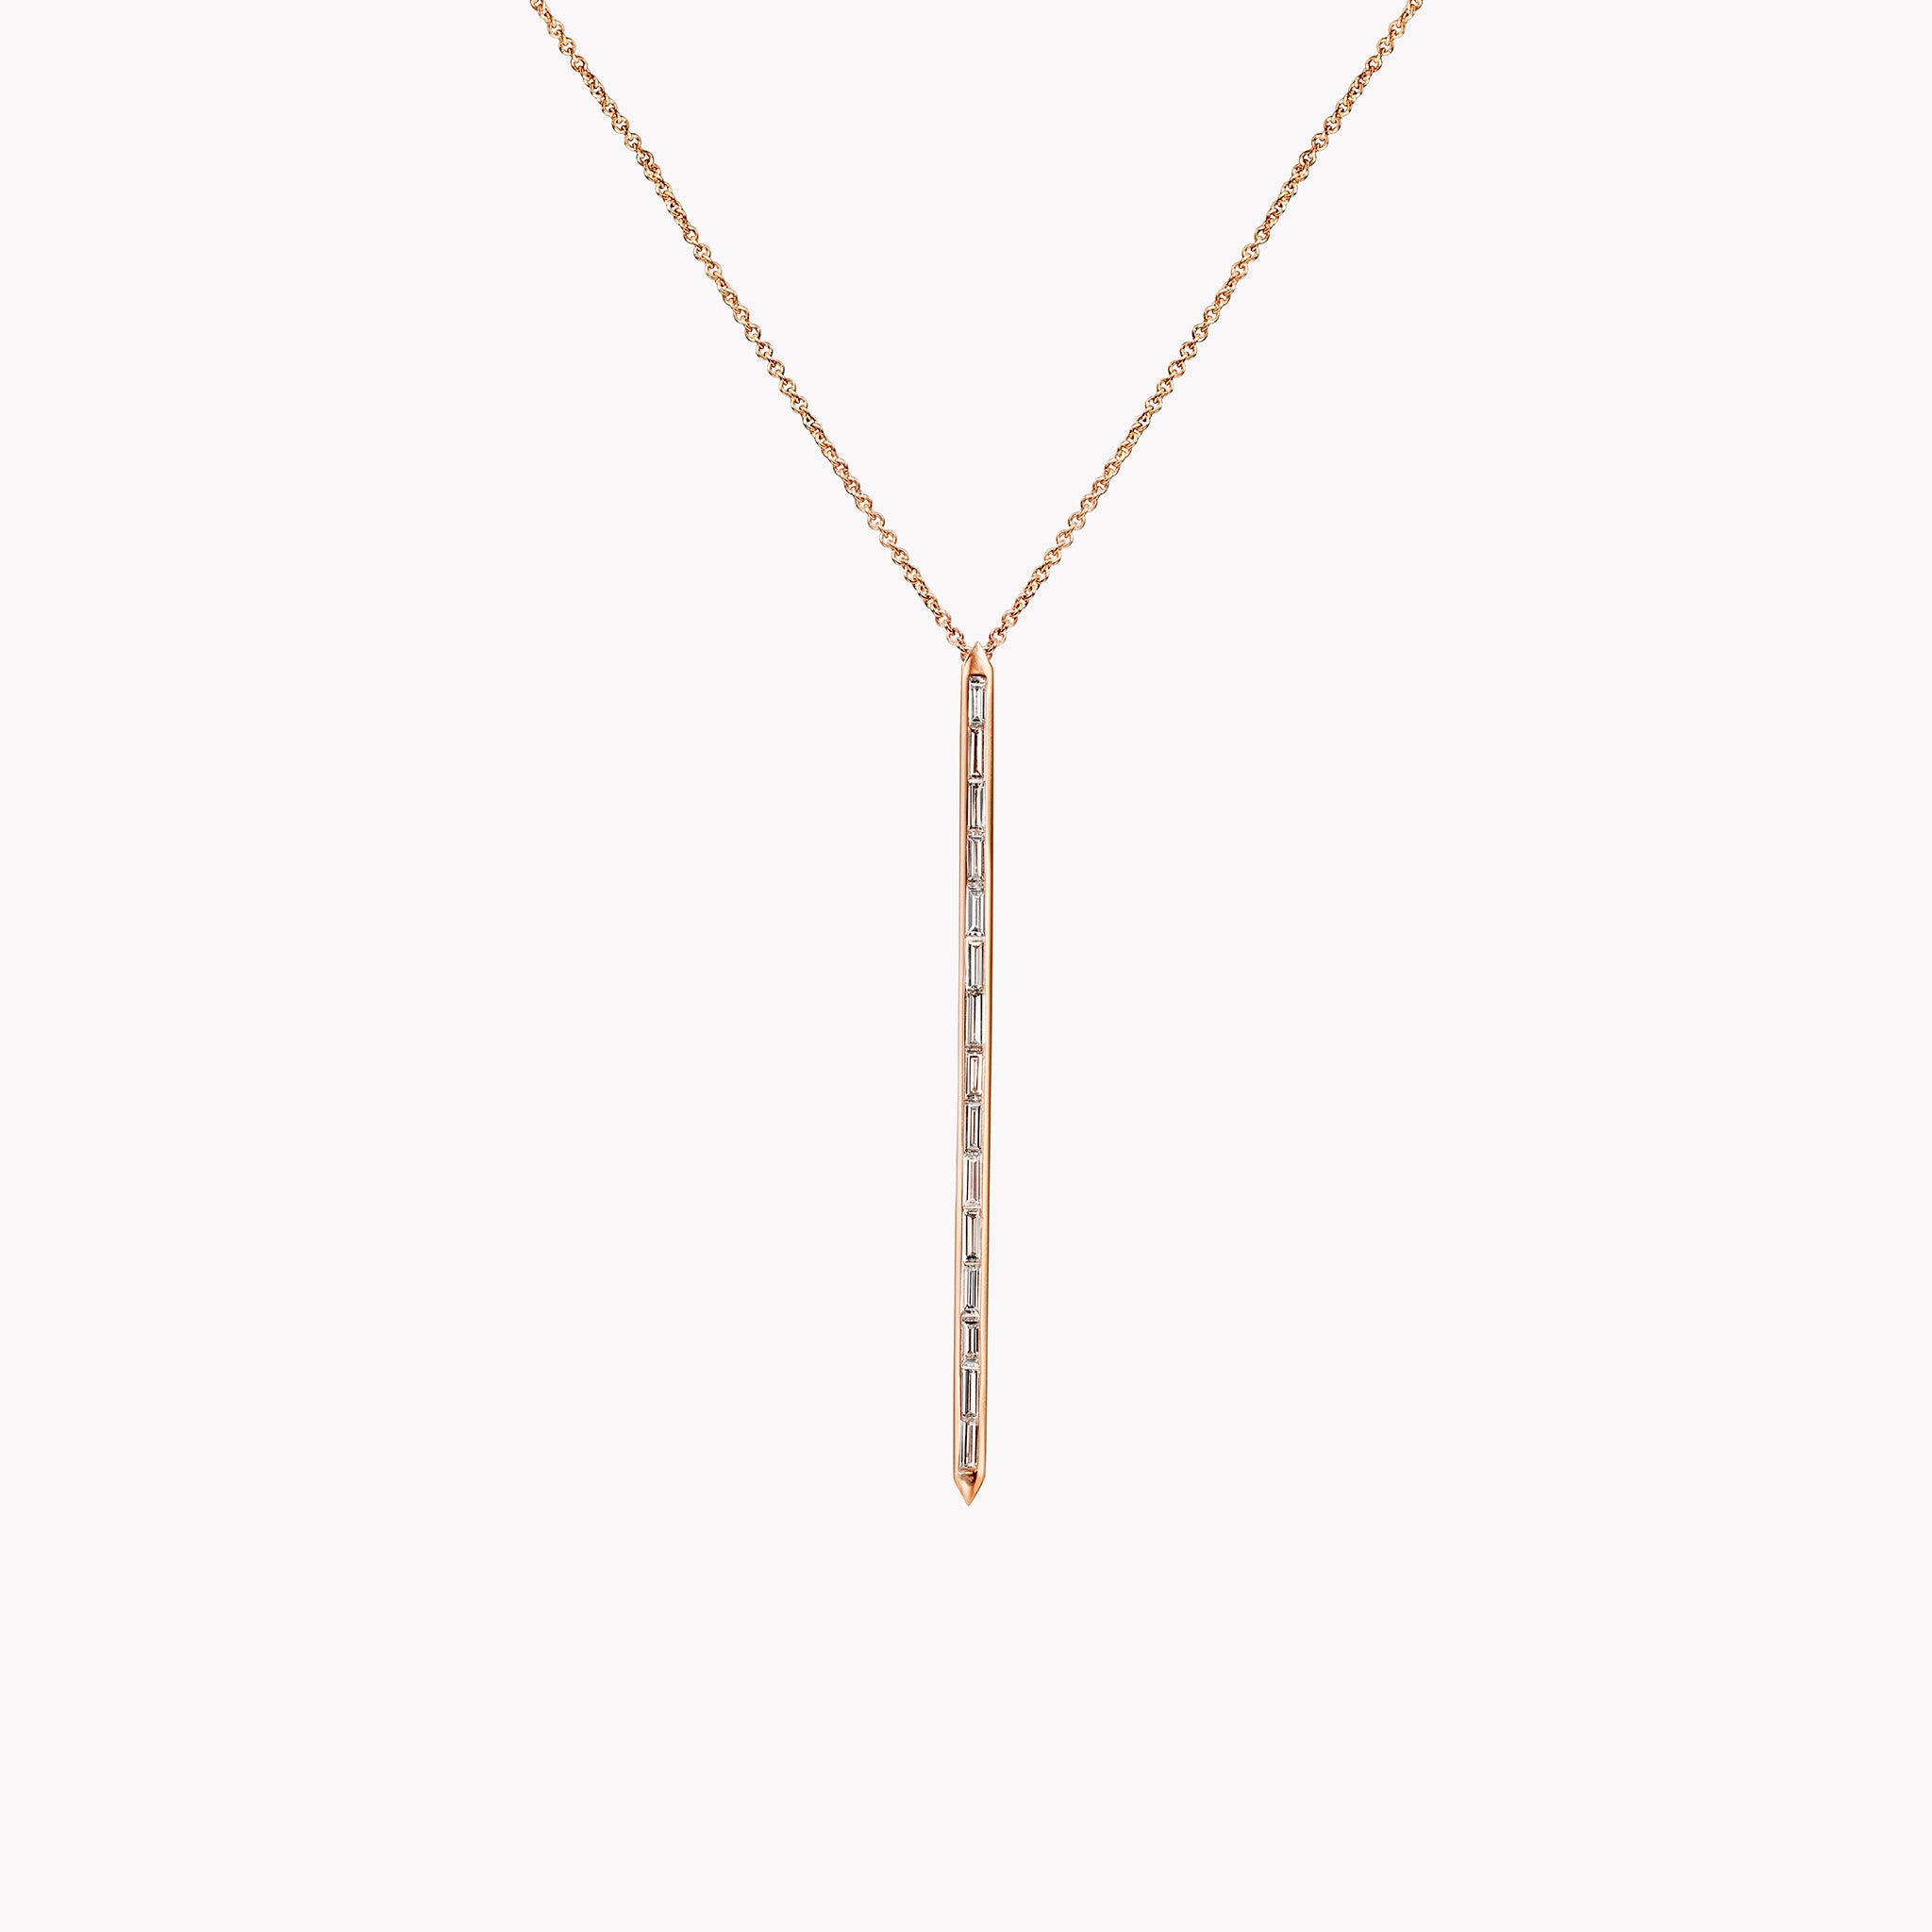 The Eve Necklace